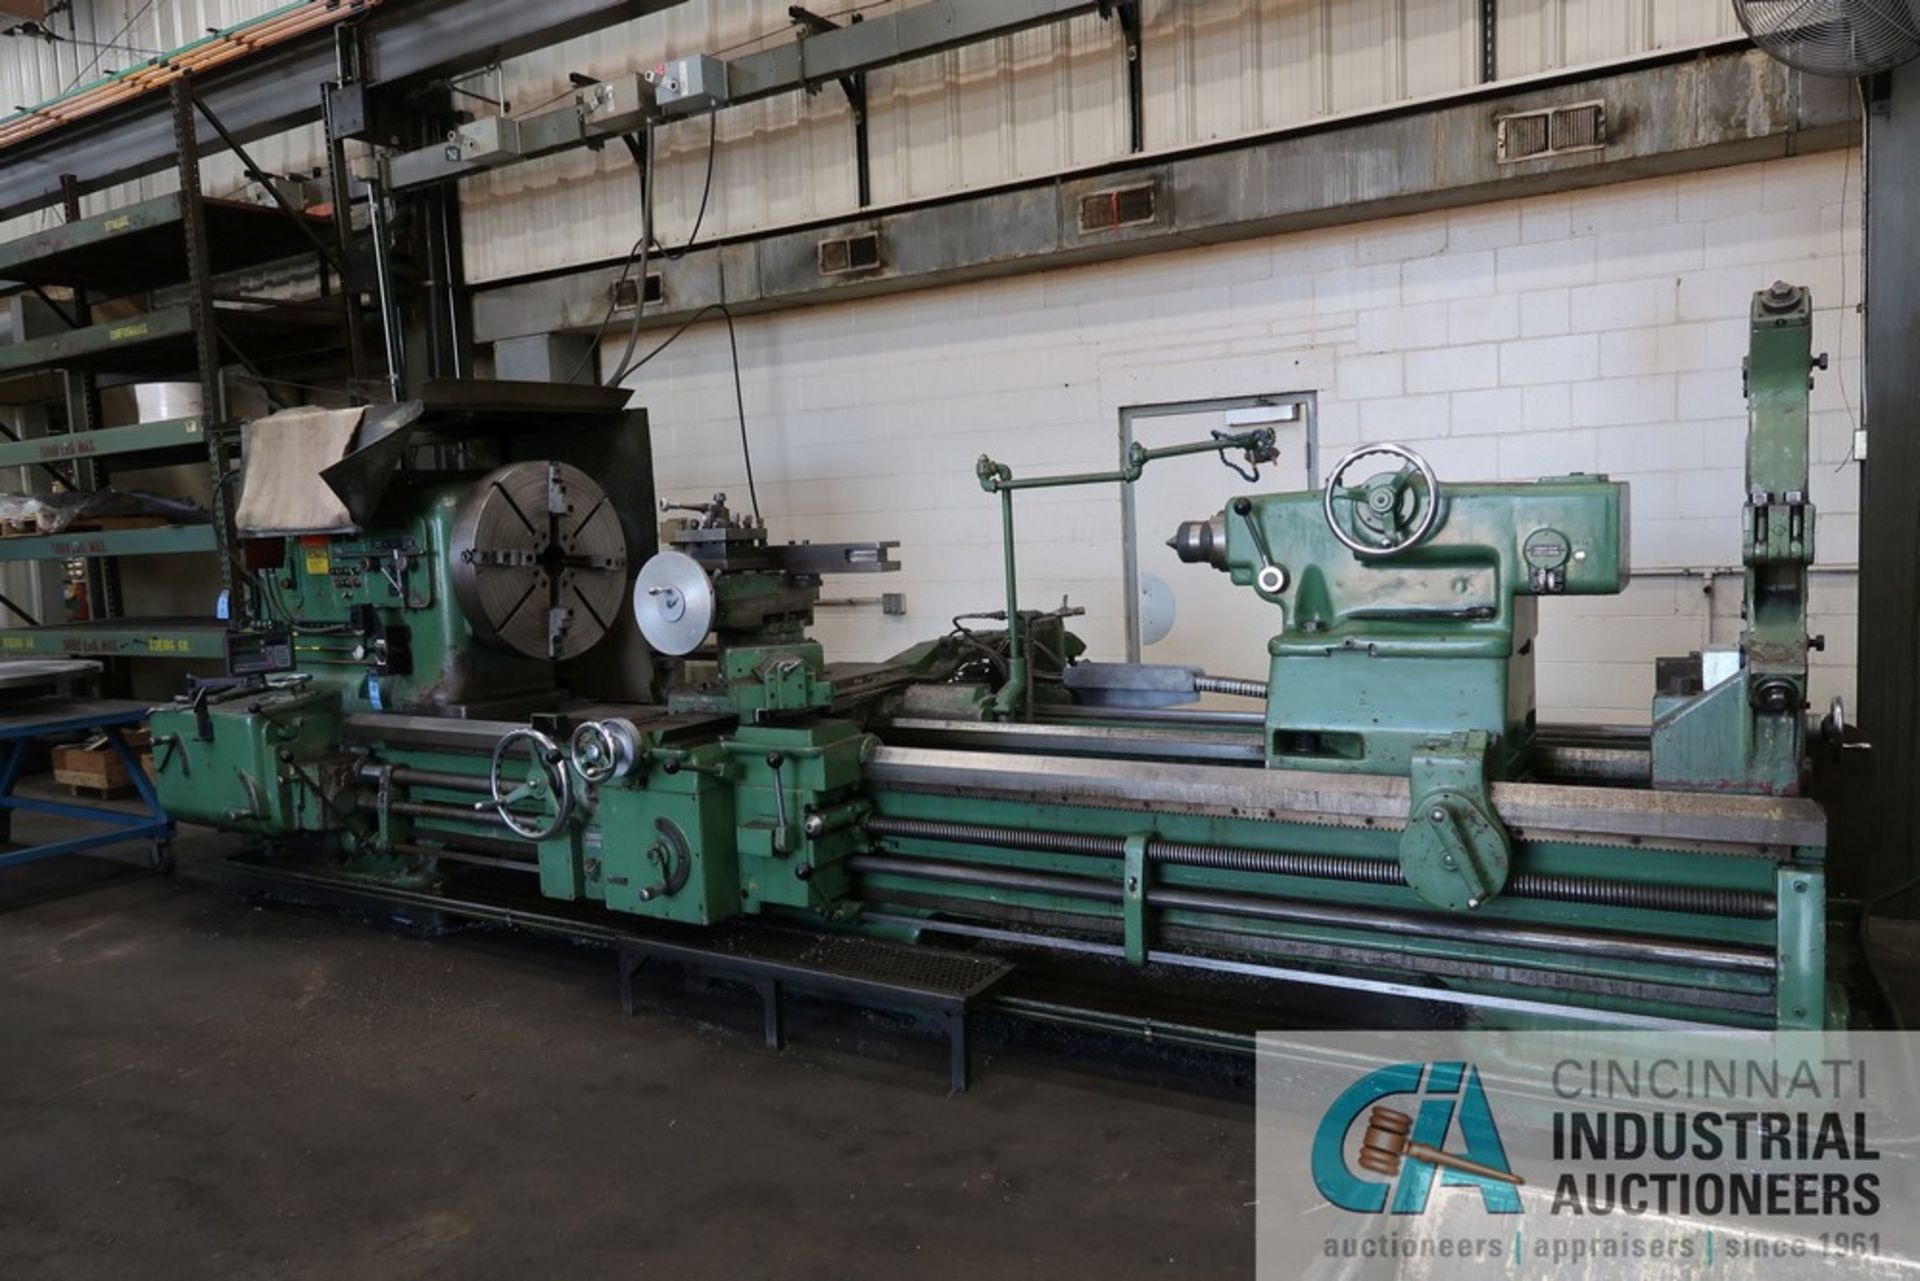 48" X 132" MONARCH GEARED HEAD ENGINE LATHE; S/N 44419 (NEW 9-1986) WITH NEWALL DP700 DRO, 4" THRU